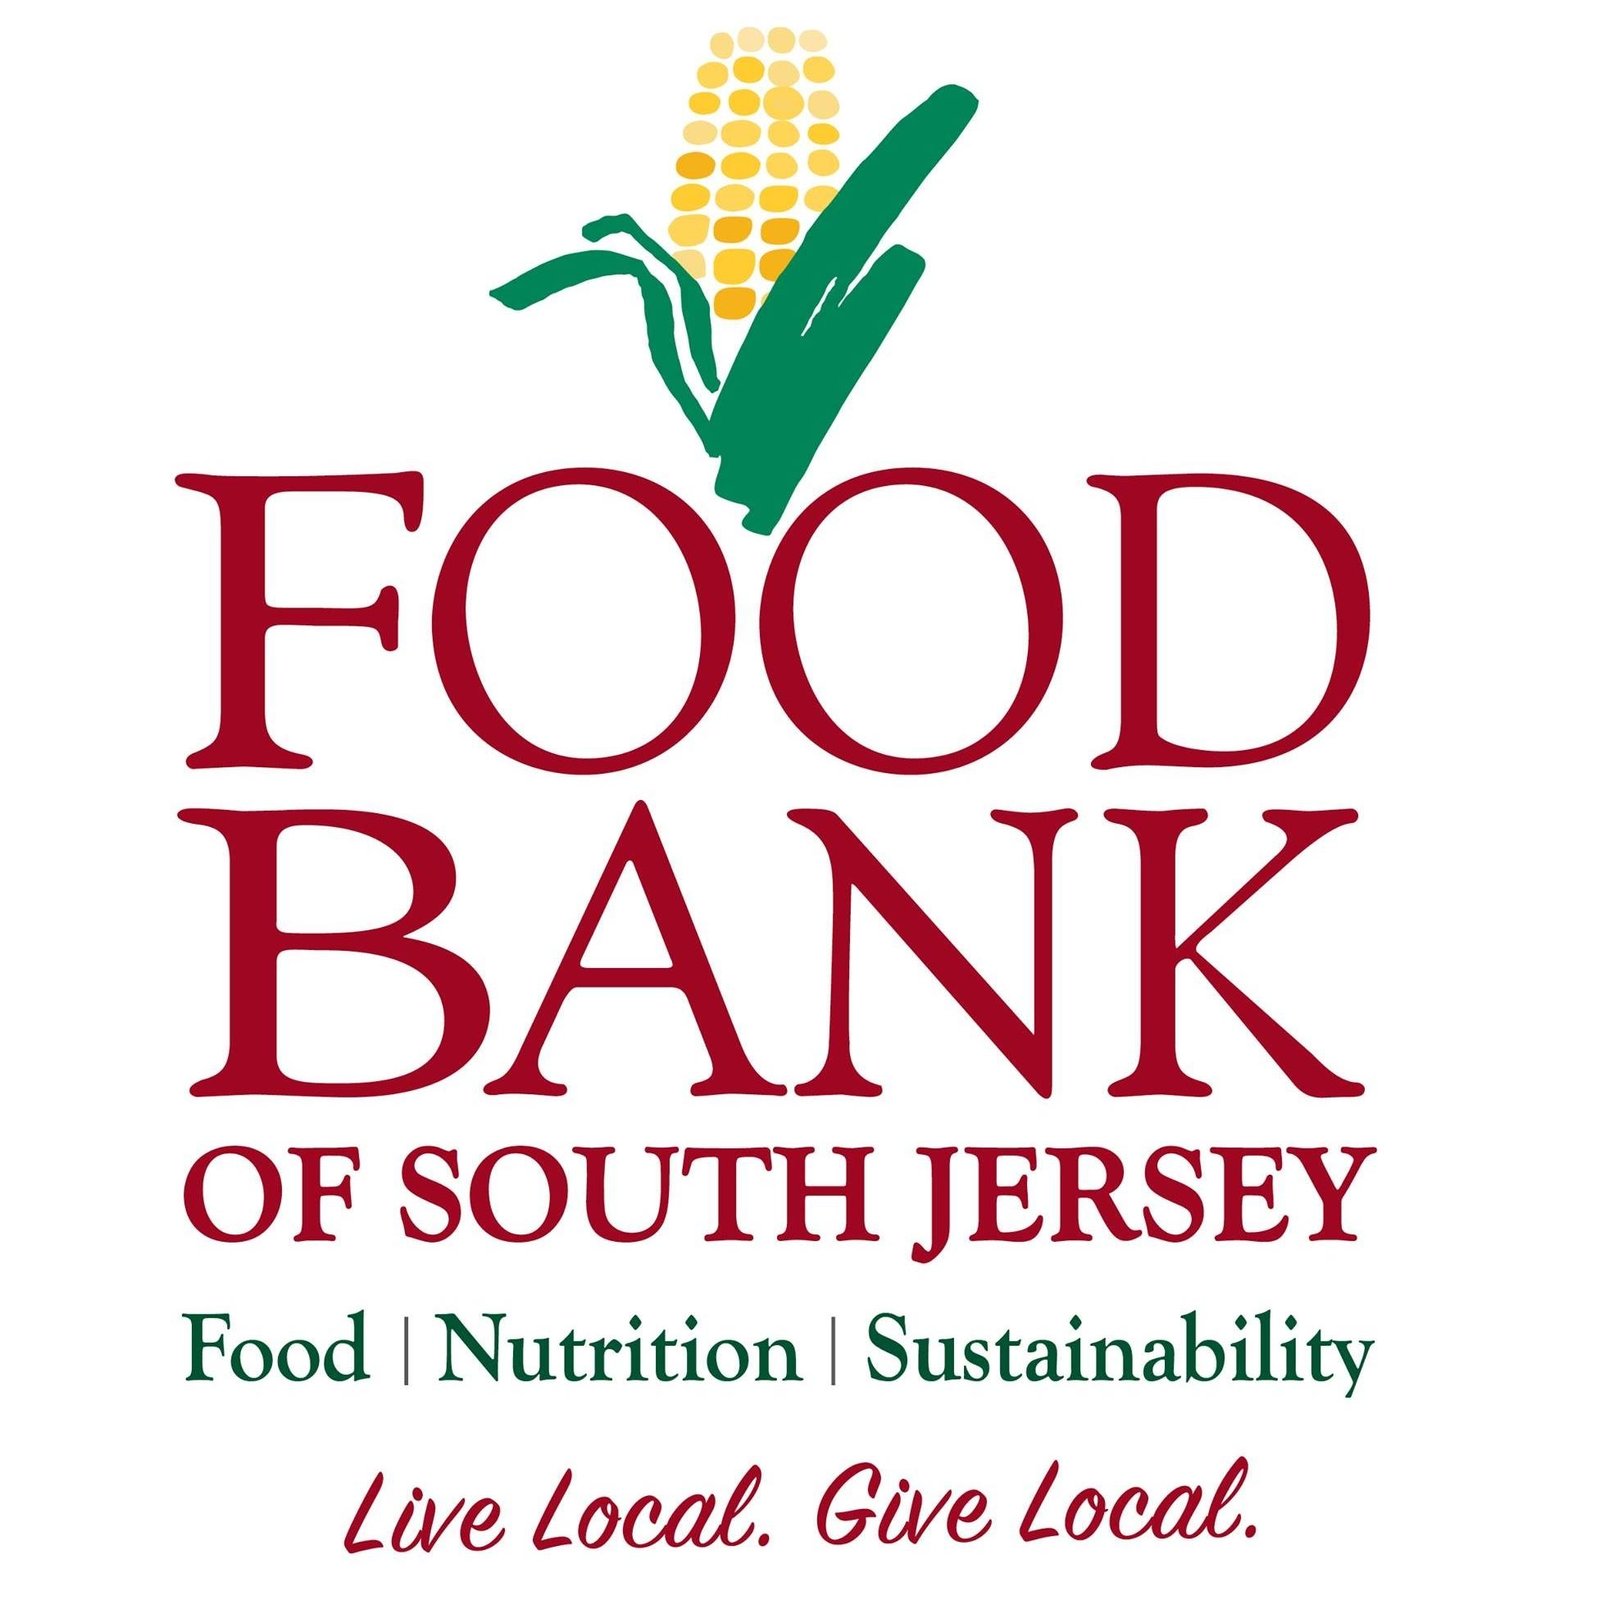 Food Bank of South Jersey